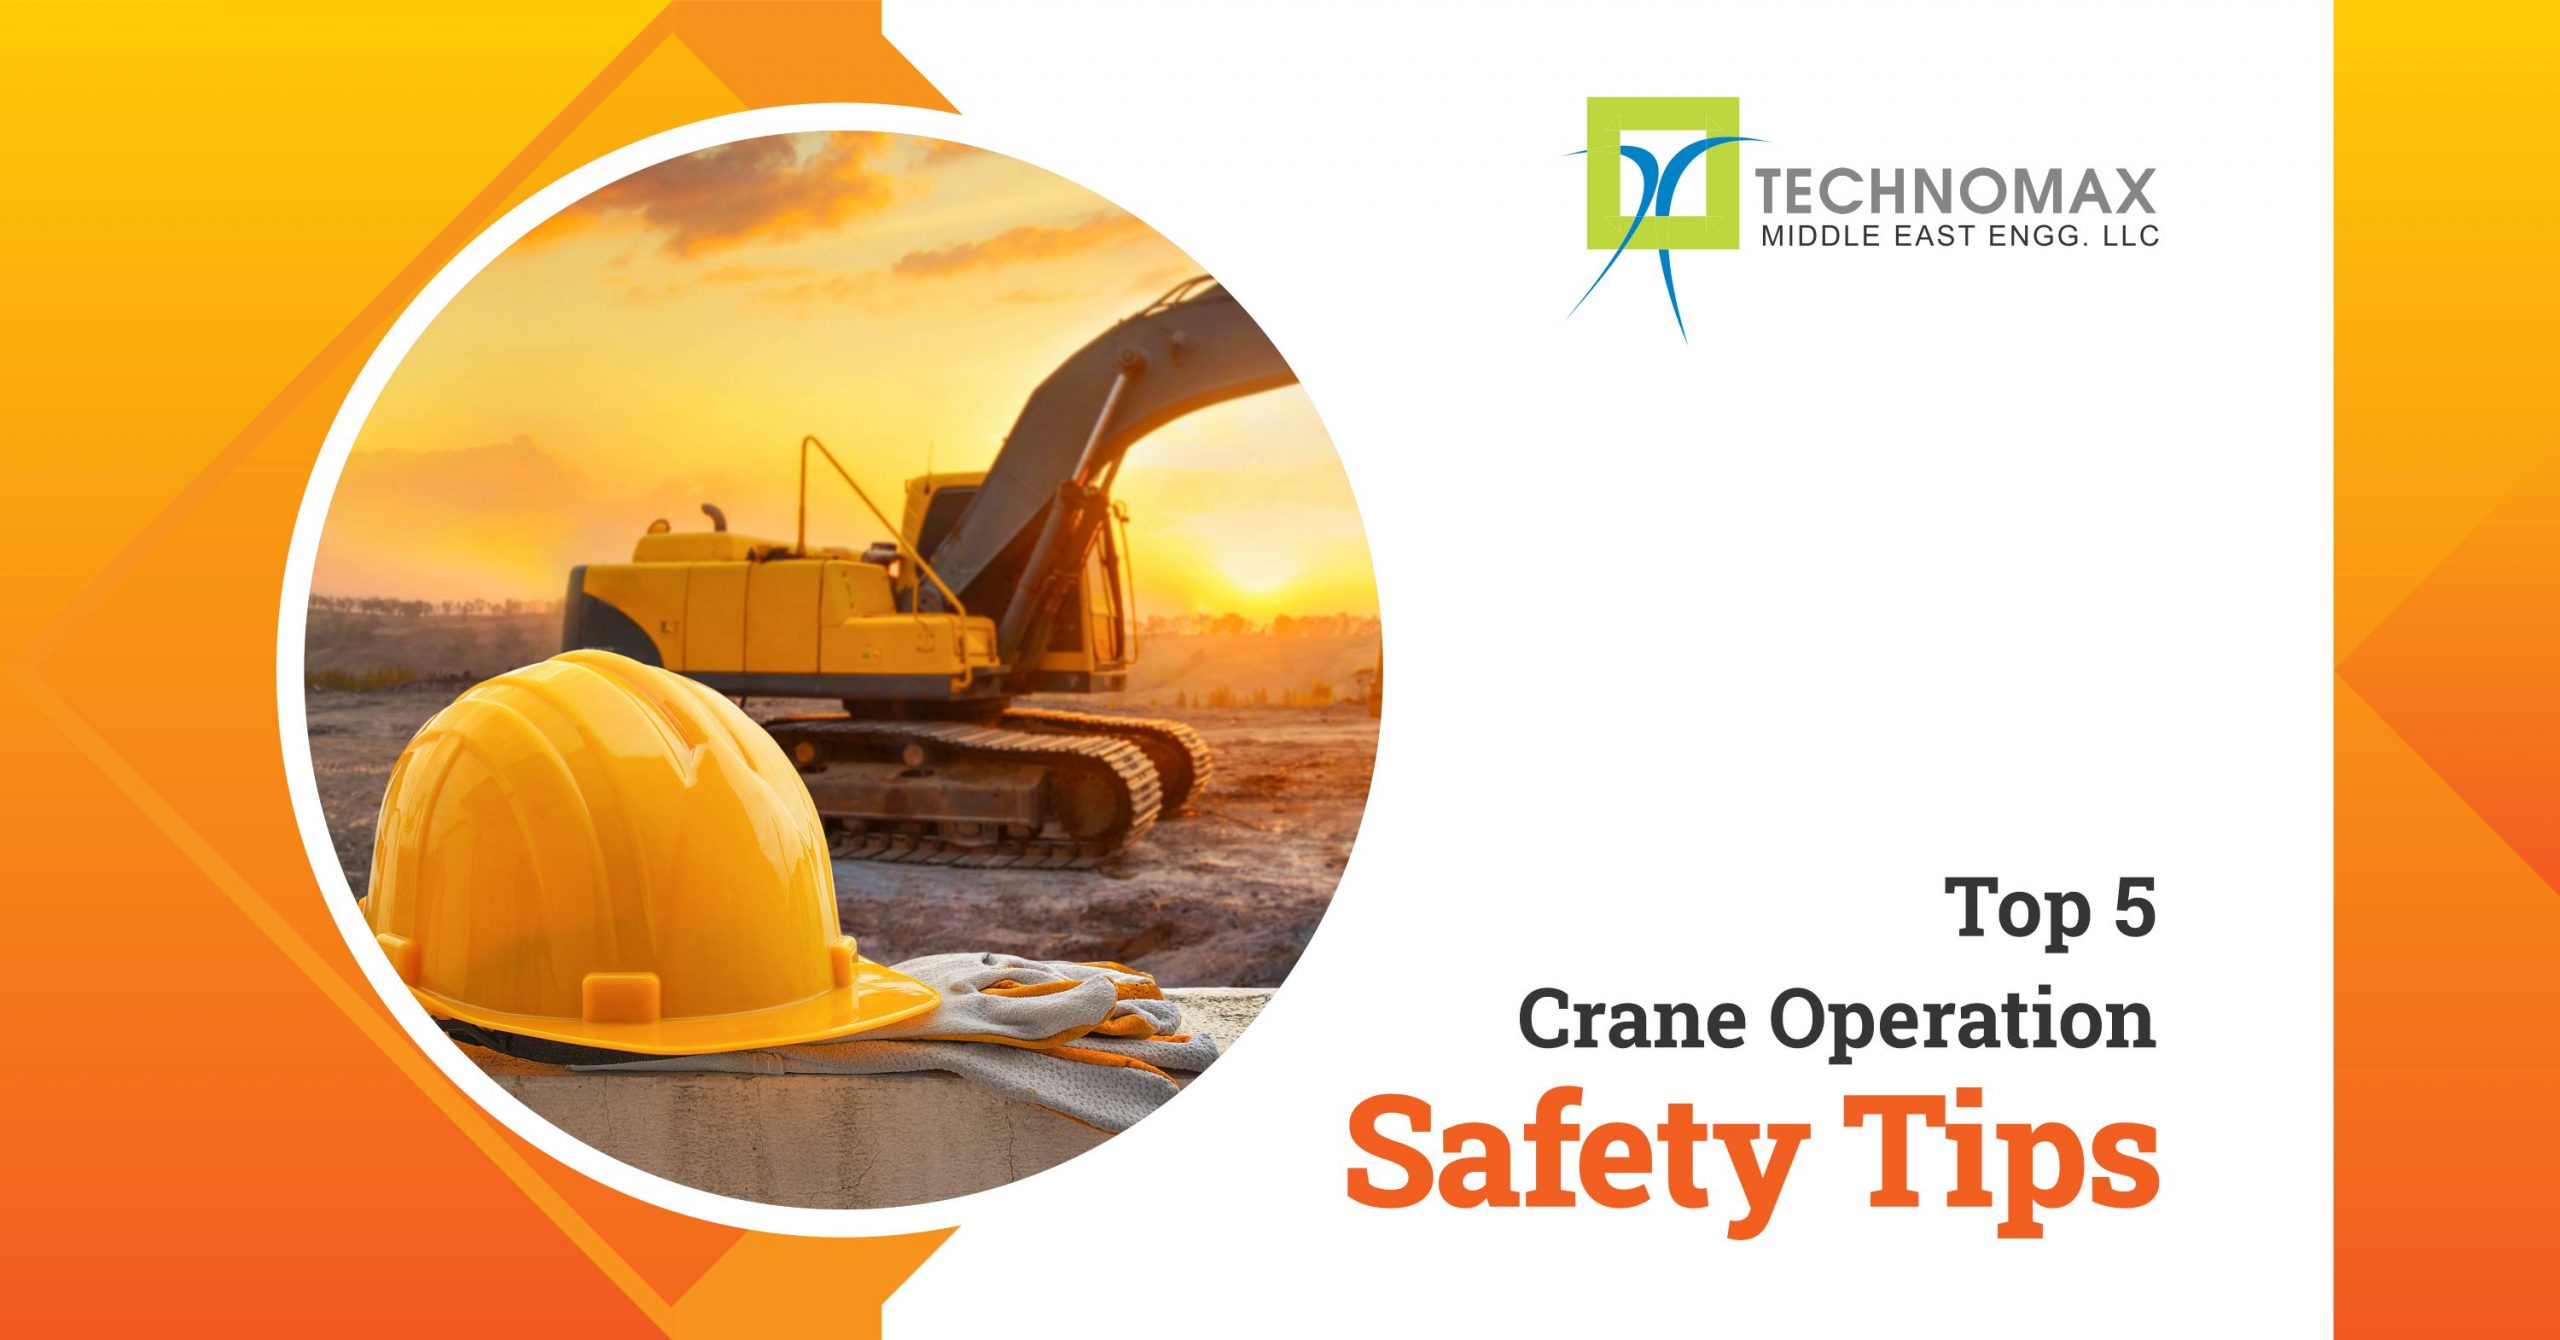 Top 5 Crane Operation Safety Tips